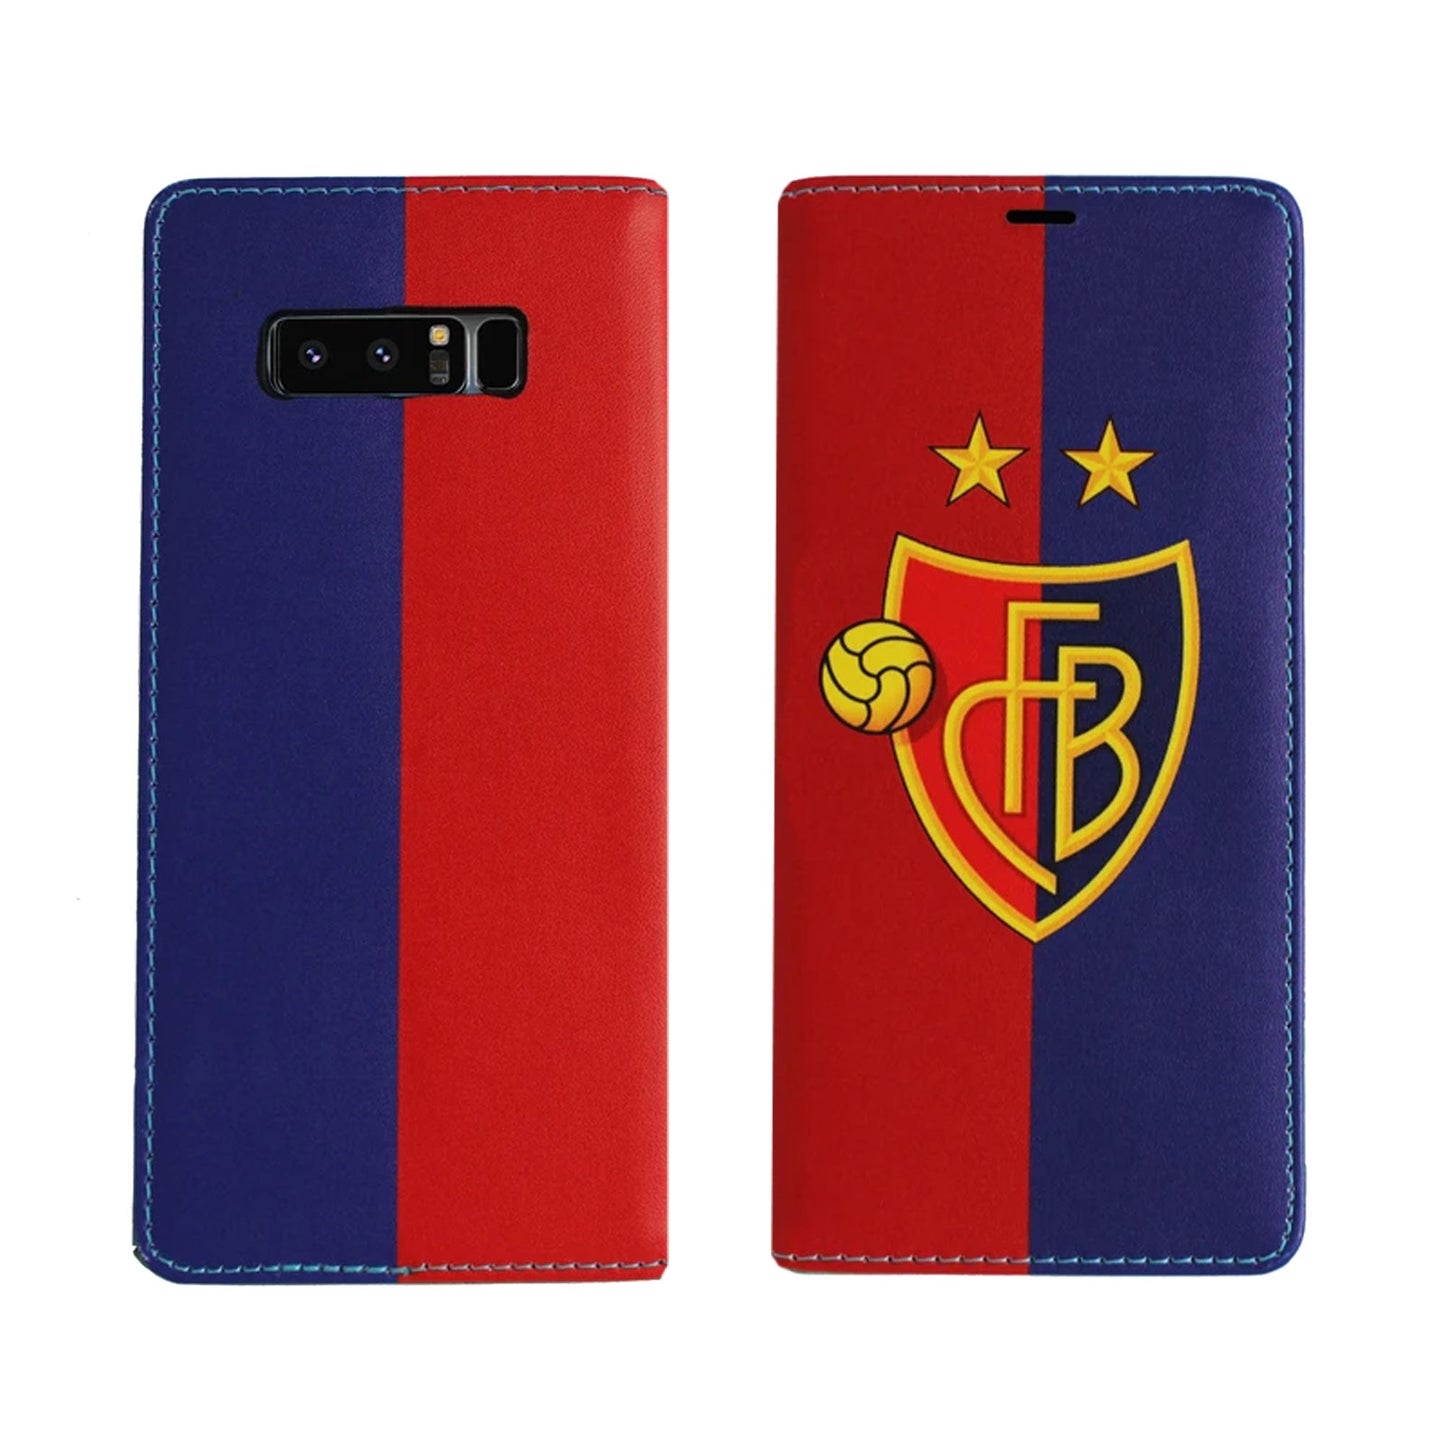 FCB red / blue panoramic case for Samsung Galaxy Note 8